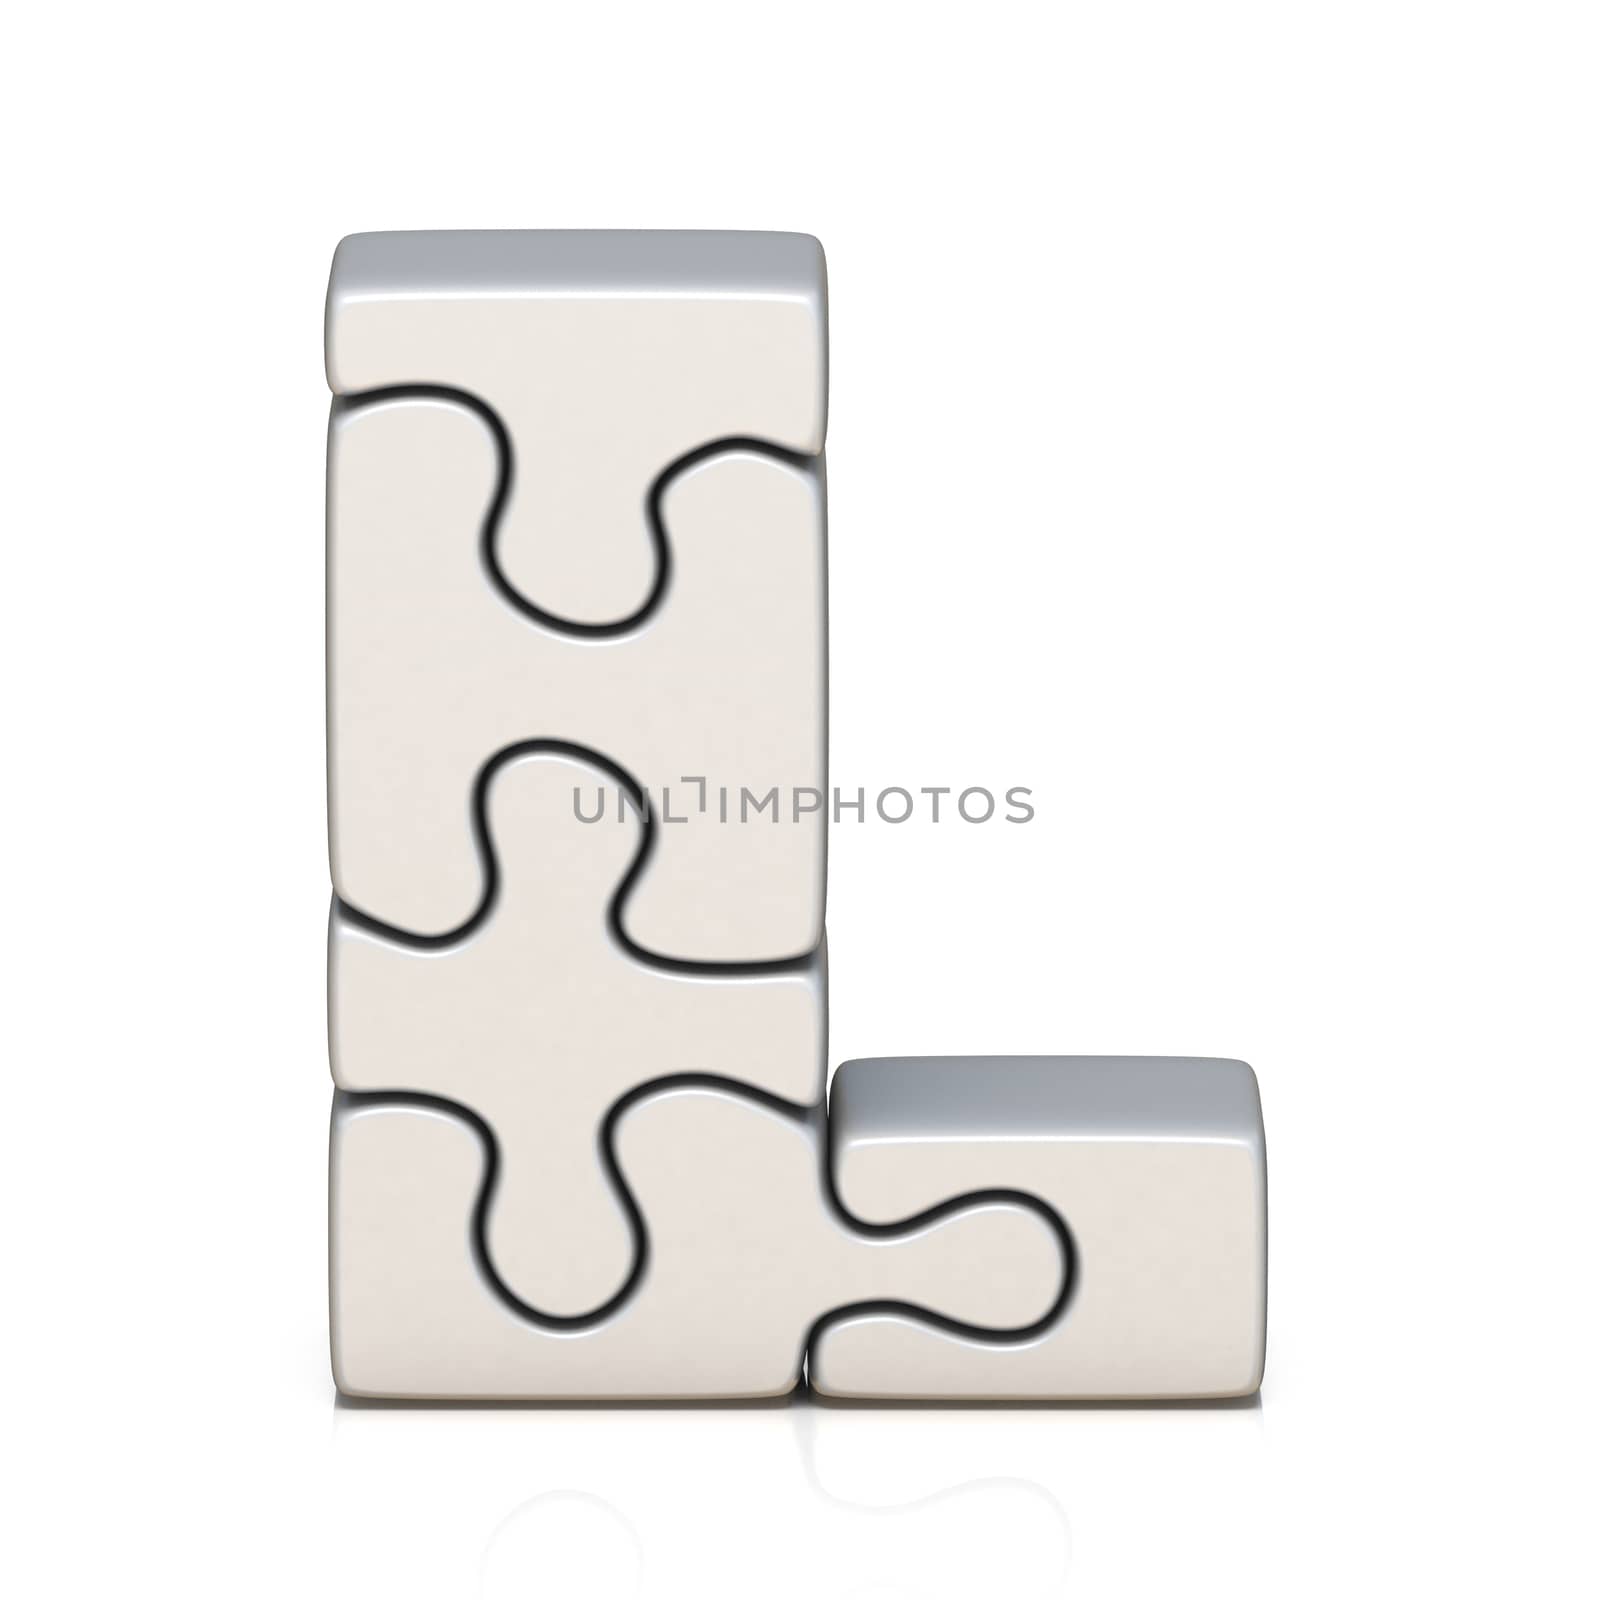 White puzzle jigsaw letter L 3D render illustration isolated on white background